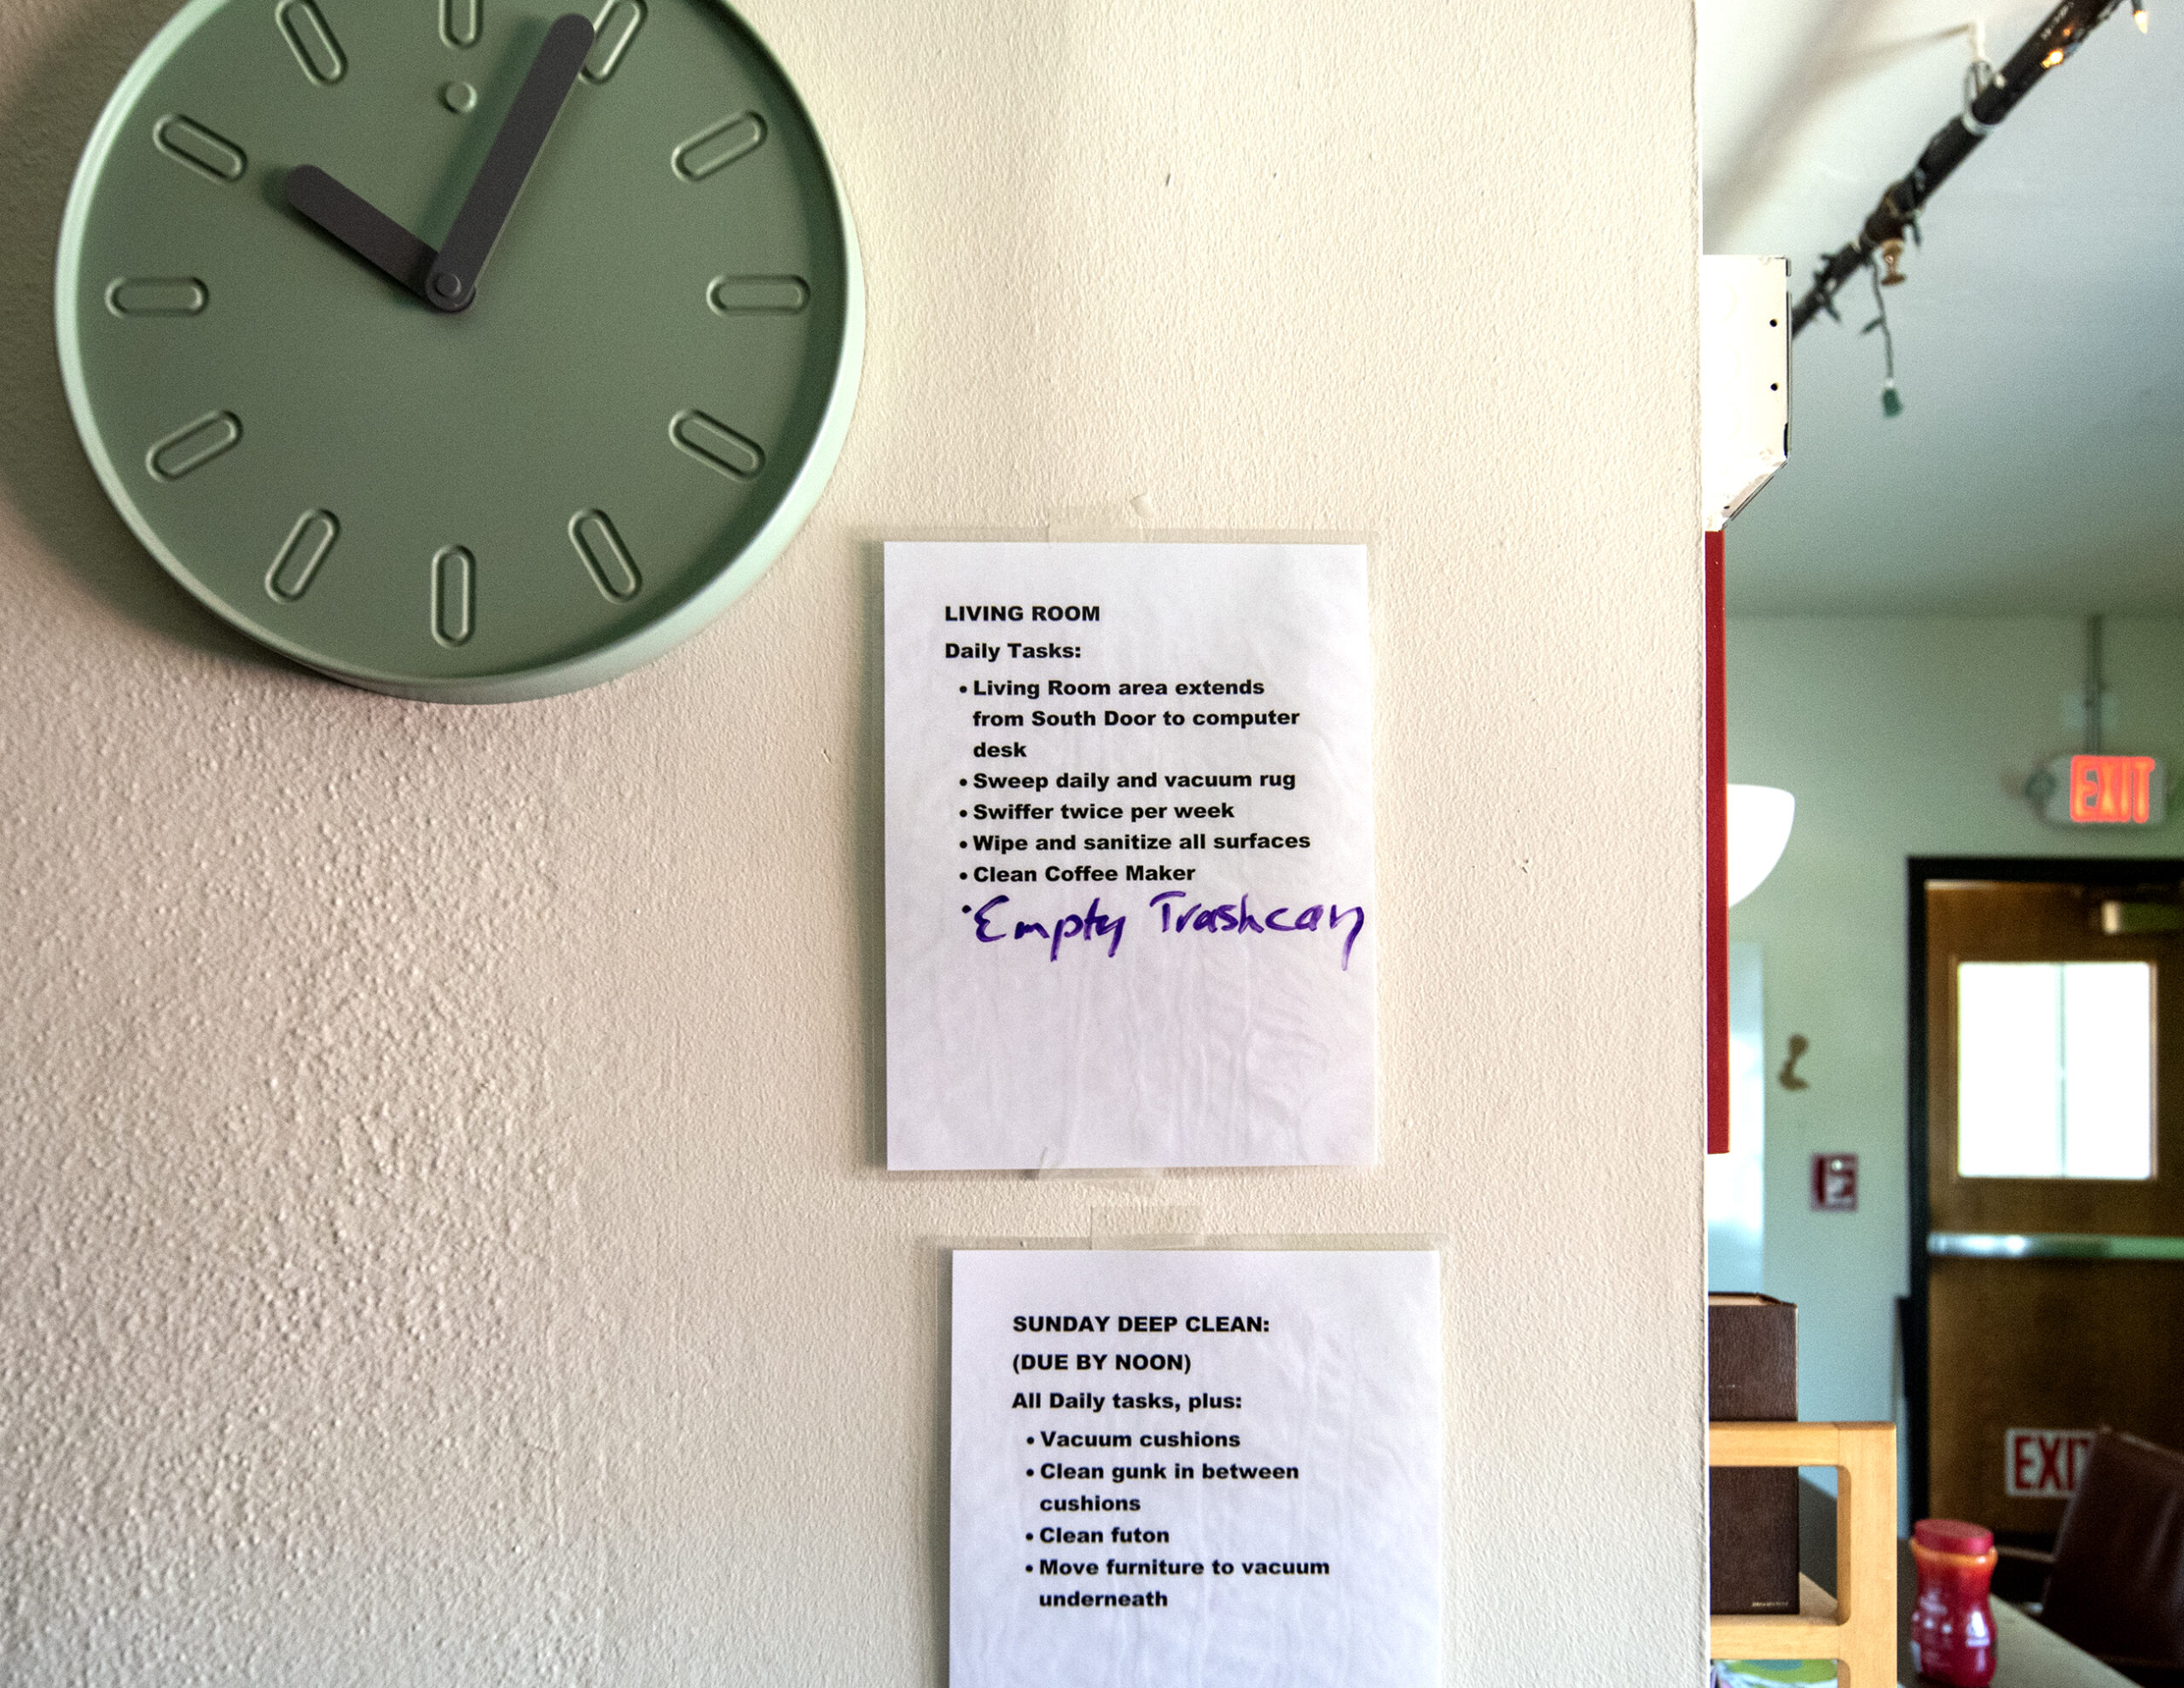 Lists with cleaning tasks listed on them are hung on the wall.